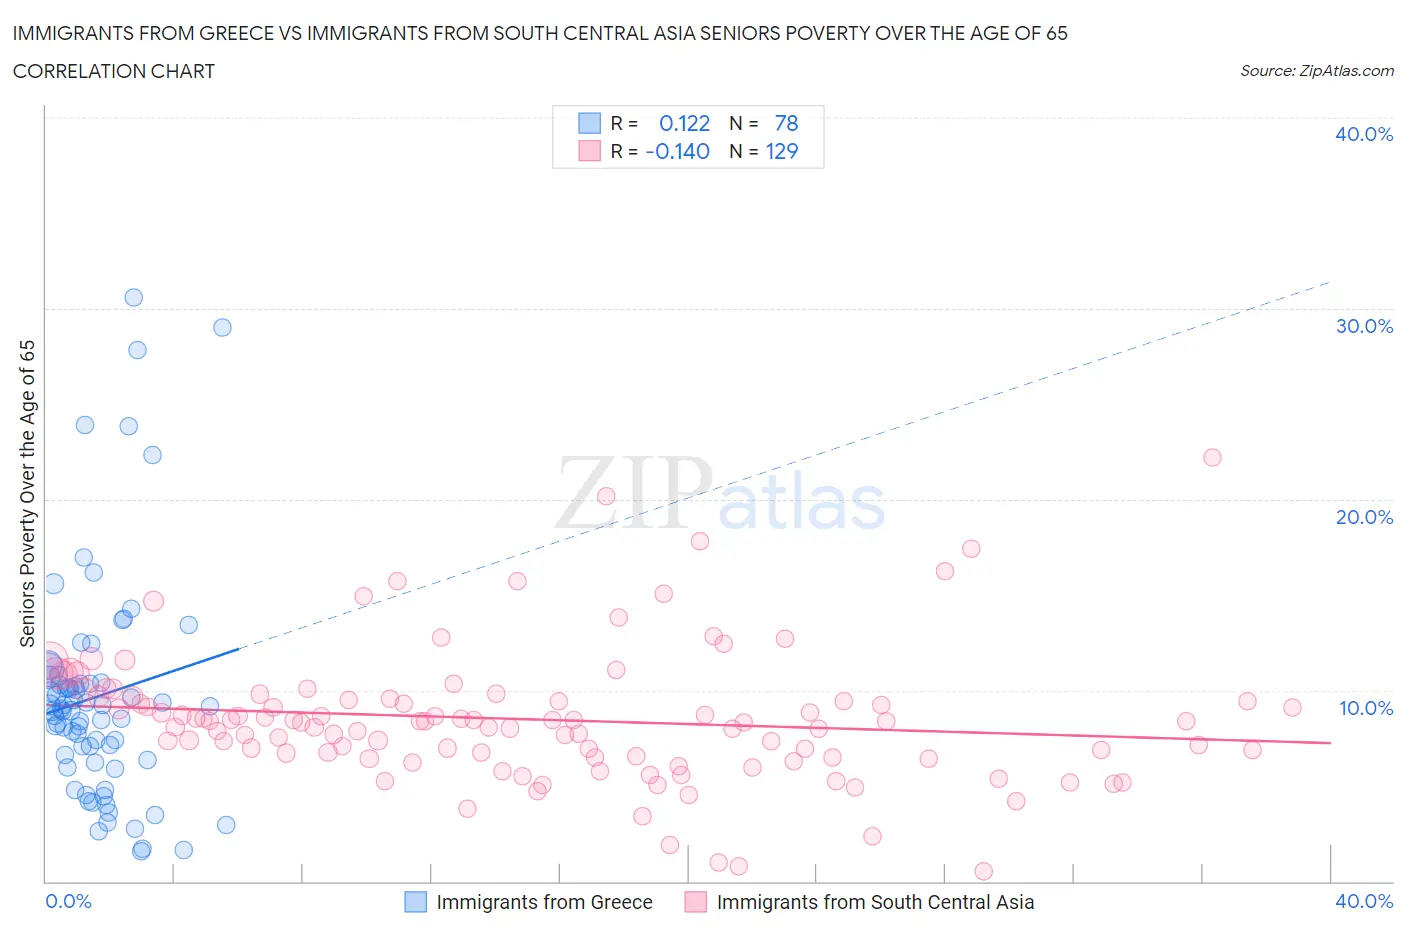 Immigrants from Greece vs Immigrants from South Central Asia Seniors Poverty Over the Age of 65